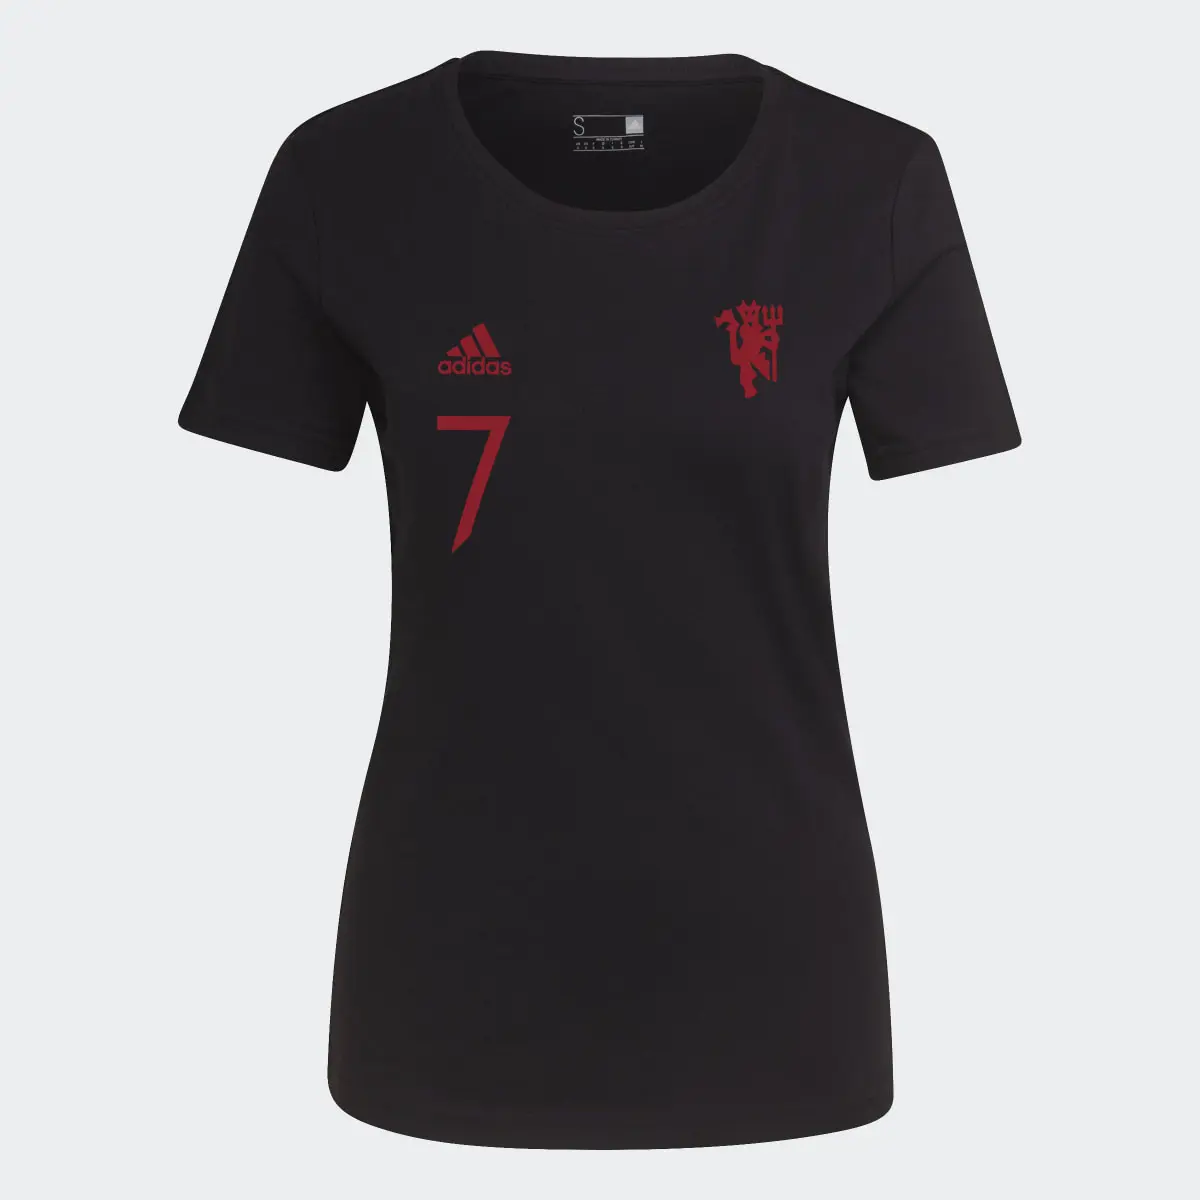 Adidas Manchester United Graphic Tee. 1